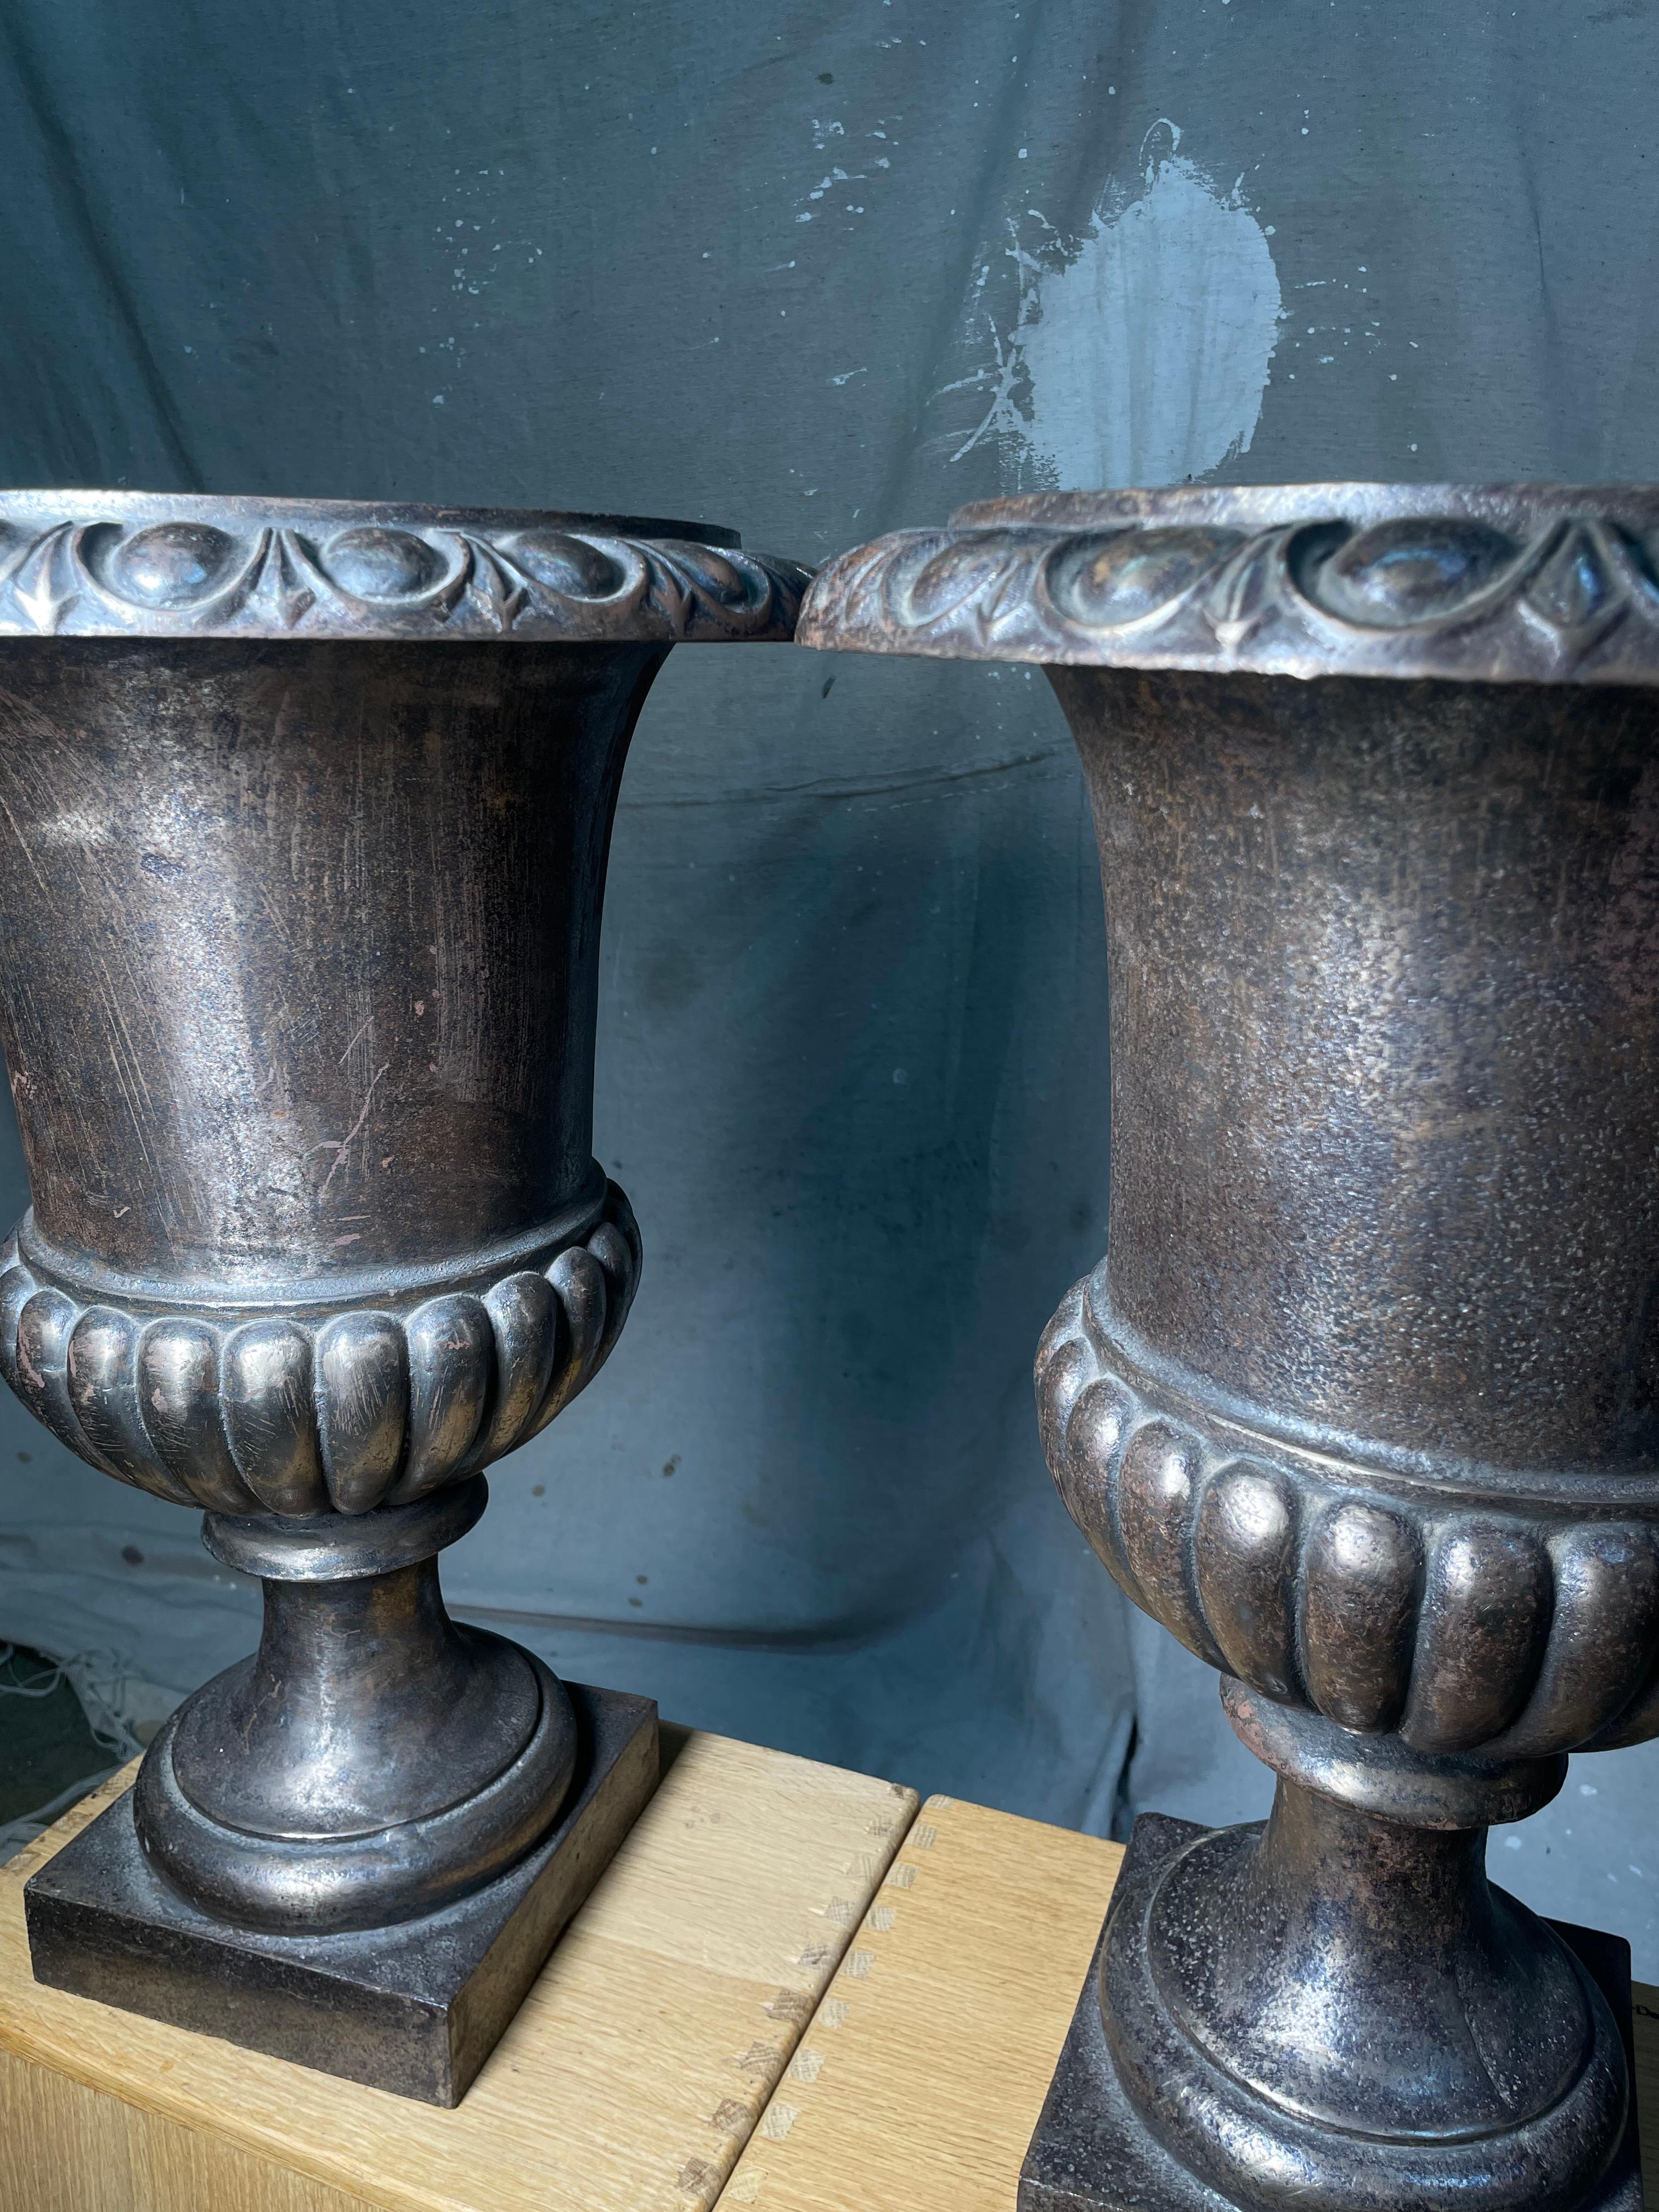 A stunning Neoclassical Wrought Iron Jardiniere or Urn with a pedestal base; their sturdy construction gives them substantial weight so you can count on them to stand strong. An egg and dart design covers the top rim of this sturdy urn, with 2